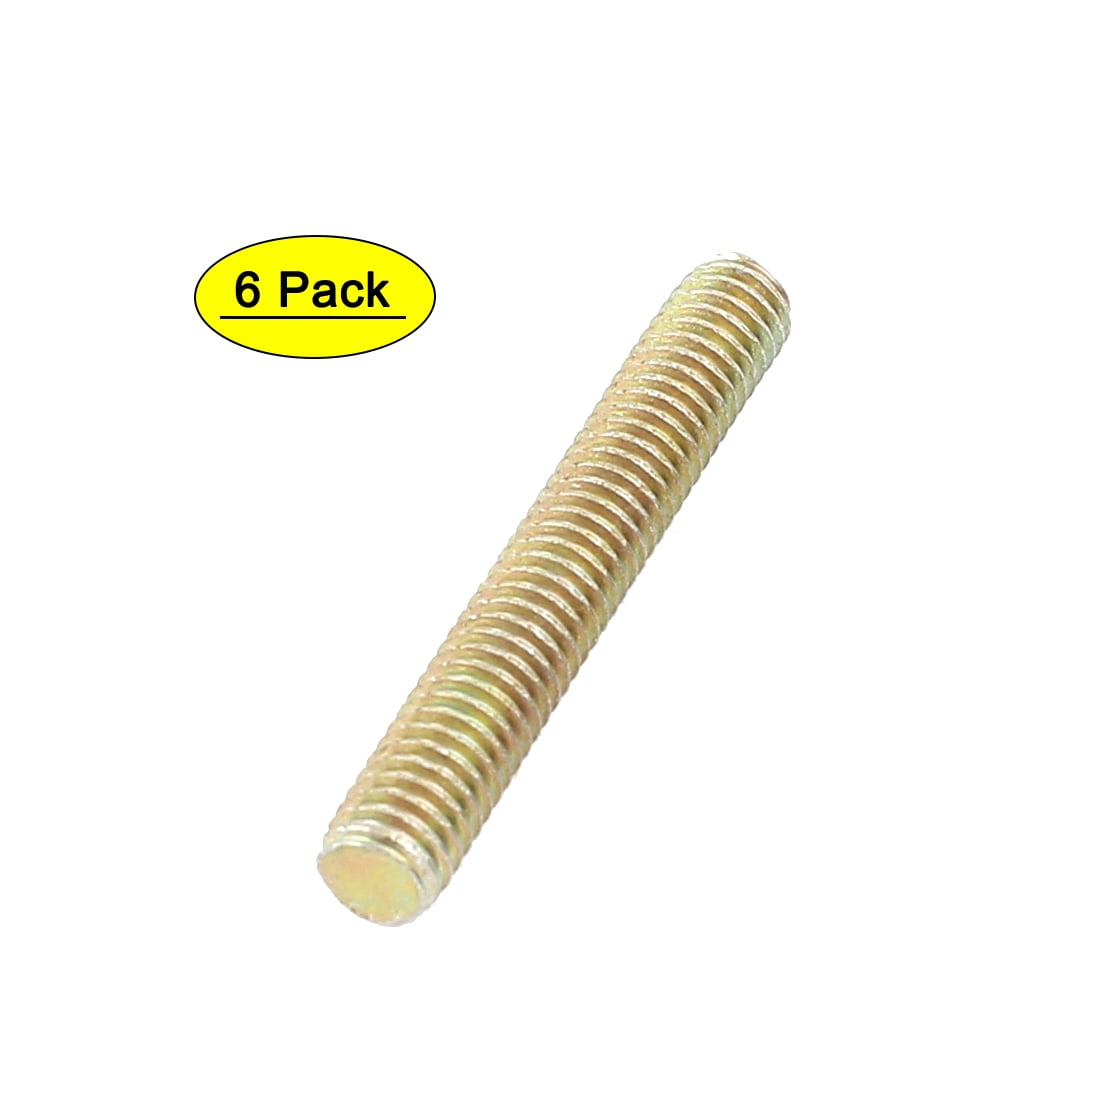 4PCS 0.5mm x 1.5mm x 500mm Brass Pipe Tube Round Bar Rod for RC Boat 